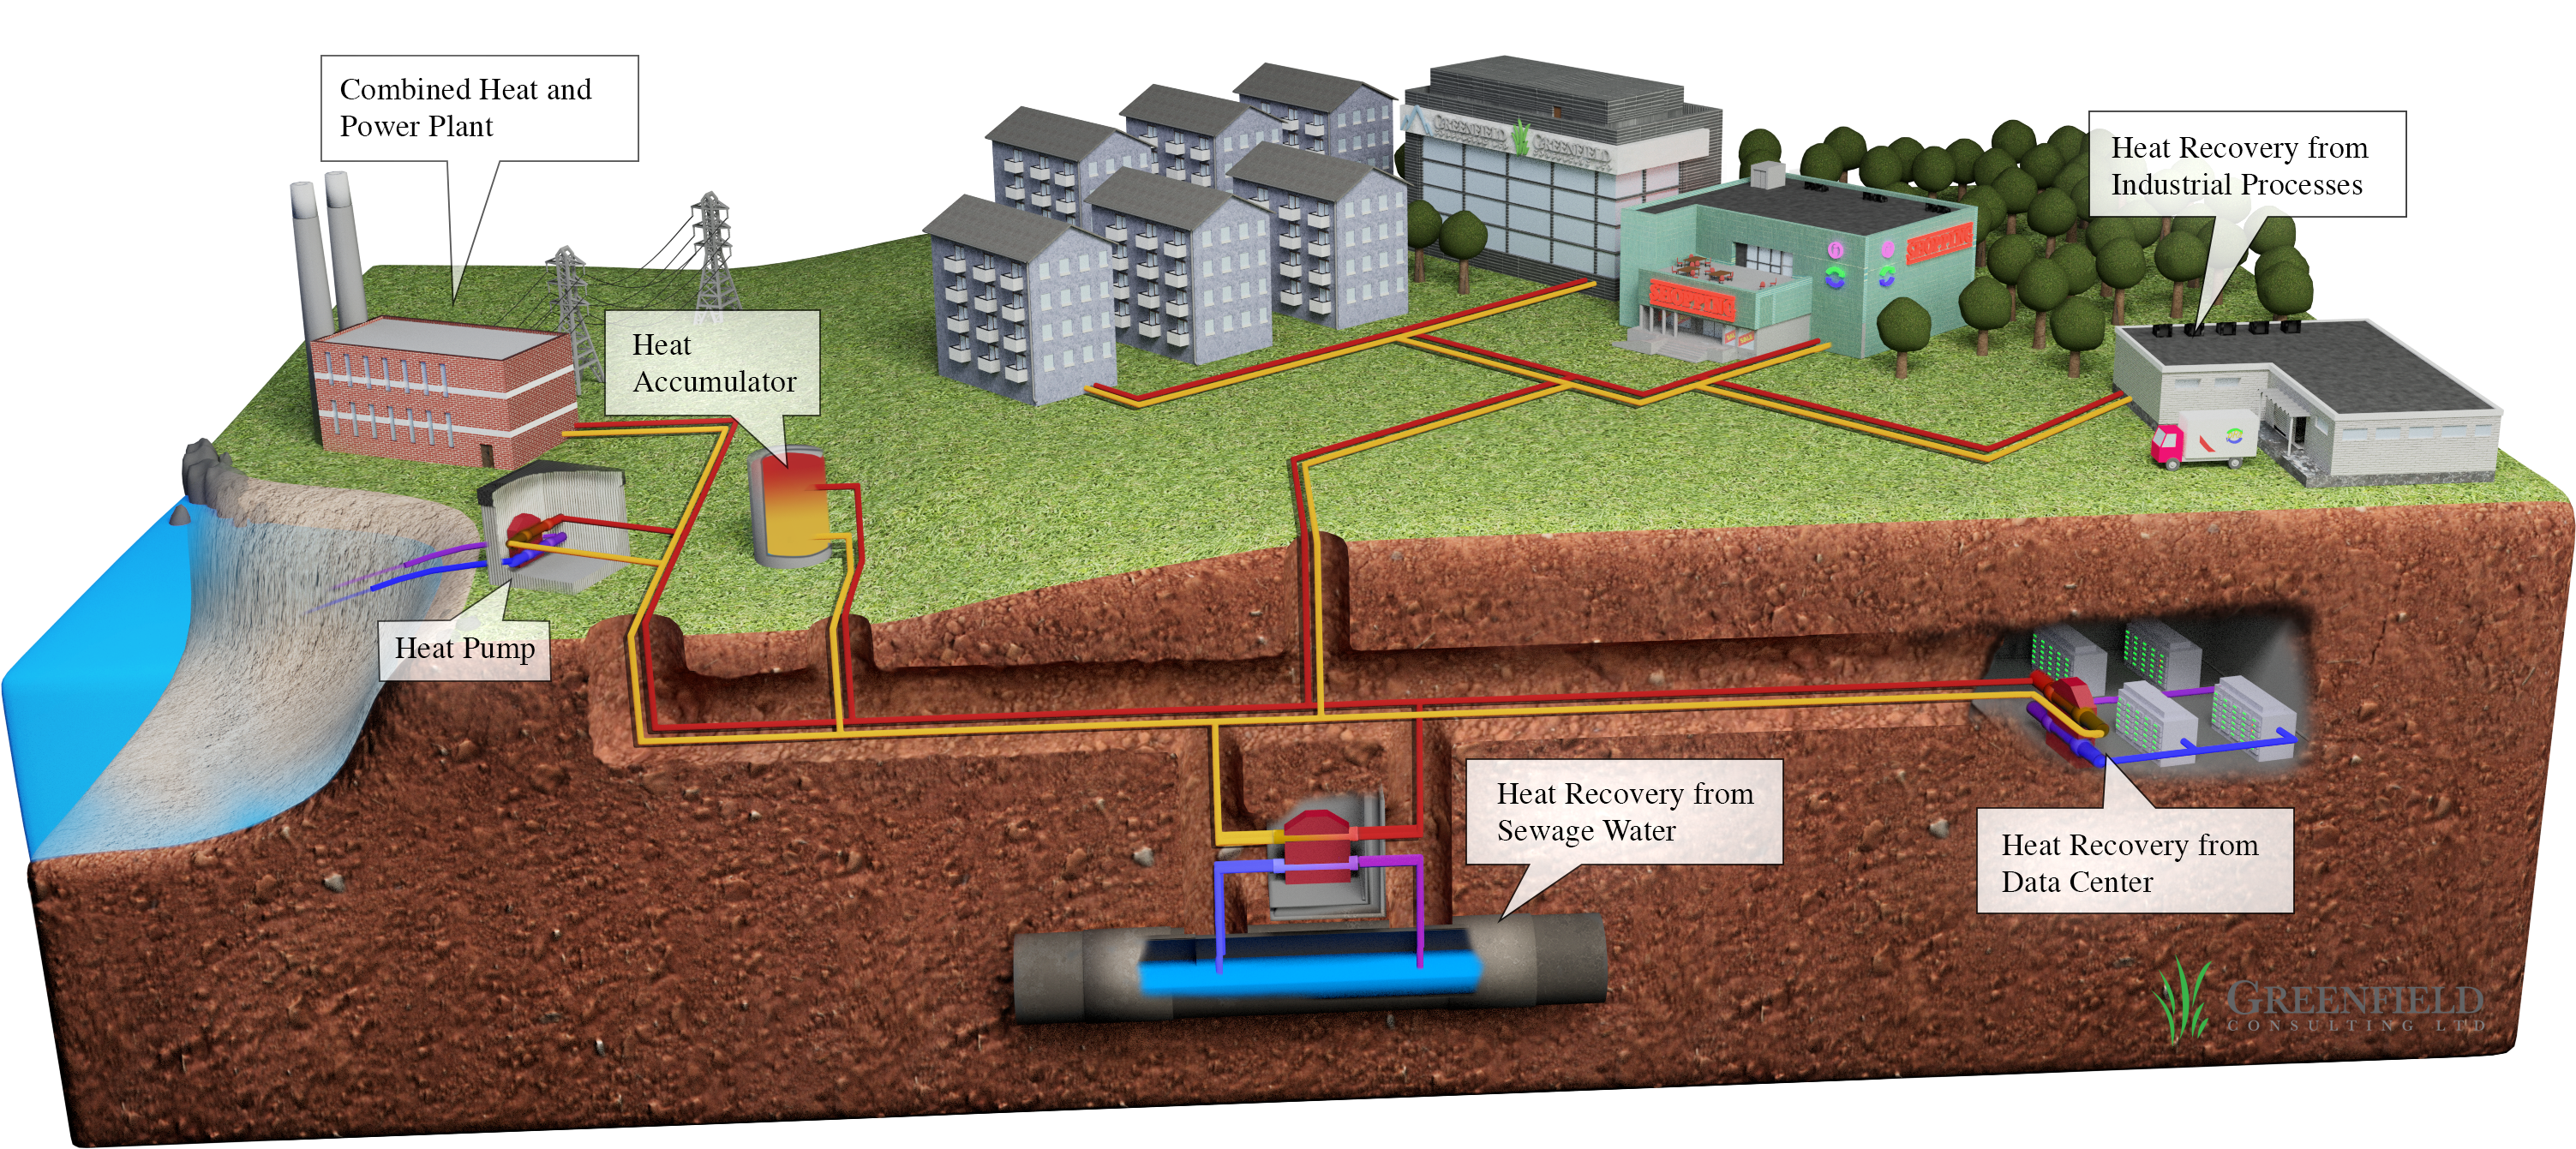 Heat Recovery Solutions - Underground District Cooling System (3240x1683)